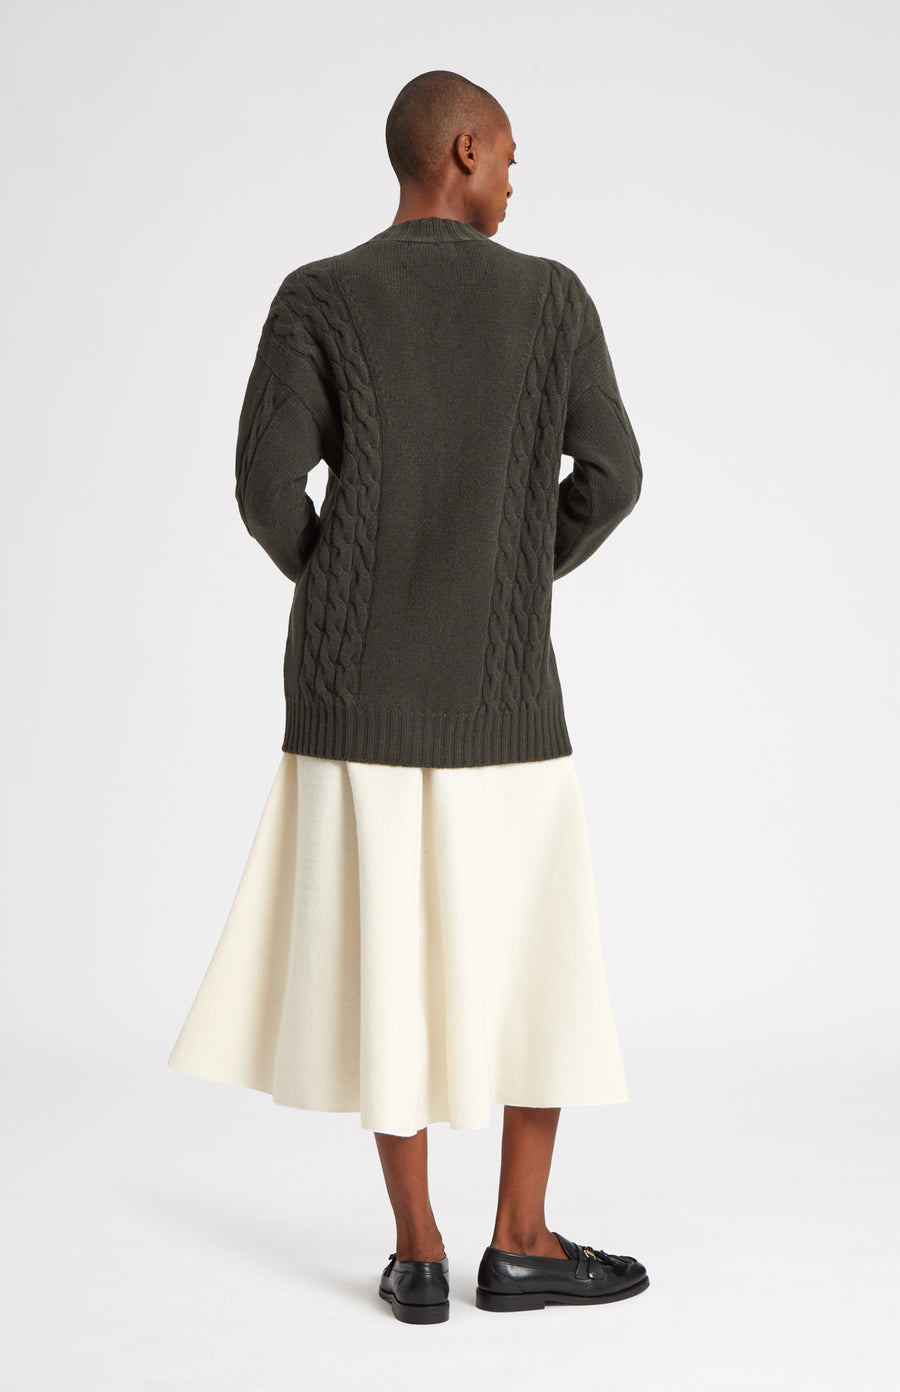 Superfine Wool Cardigan with Cable detail in Khaki rear view - Pringle of Scotland